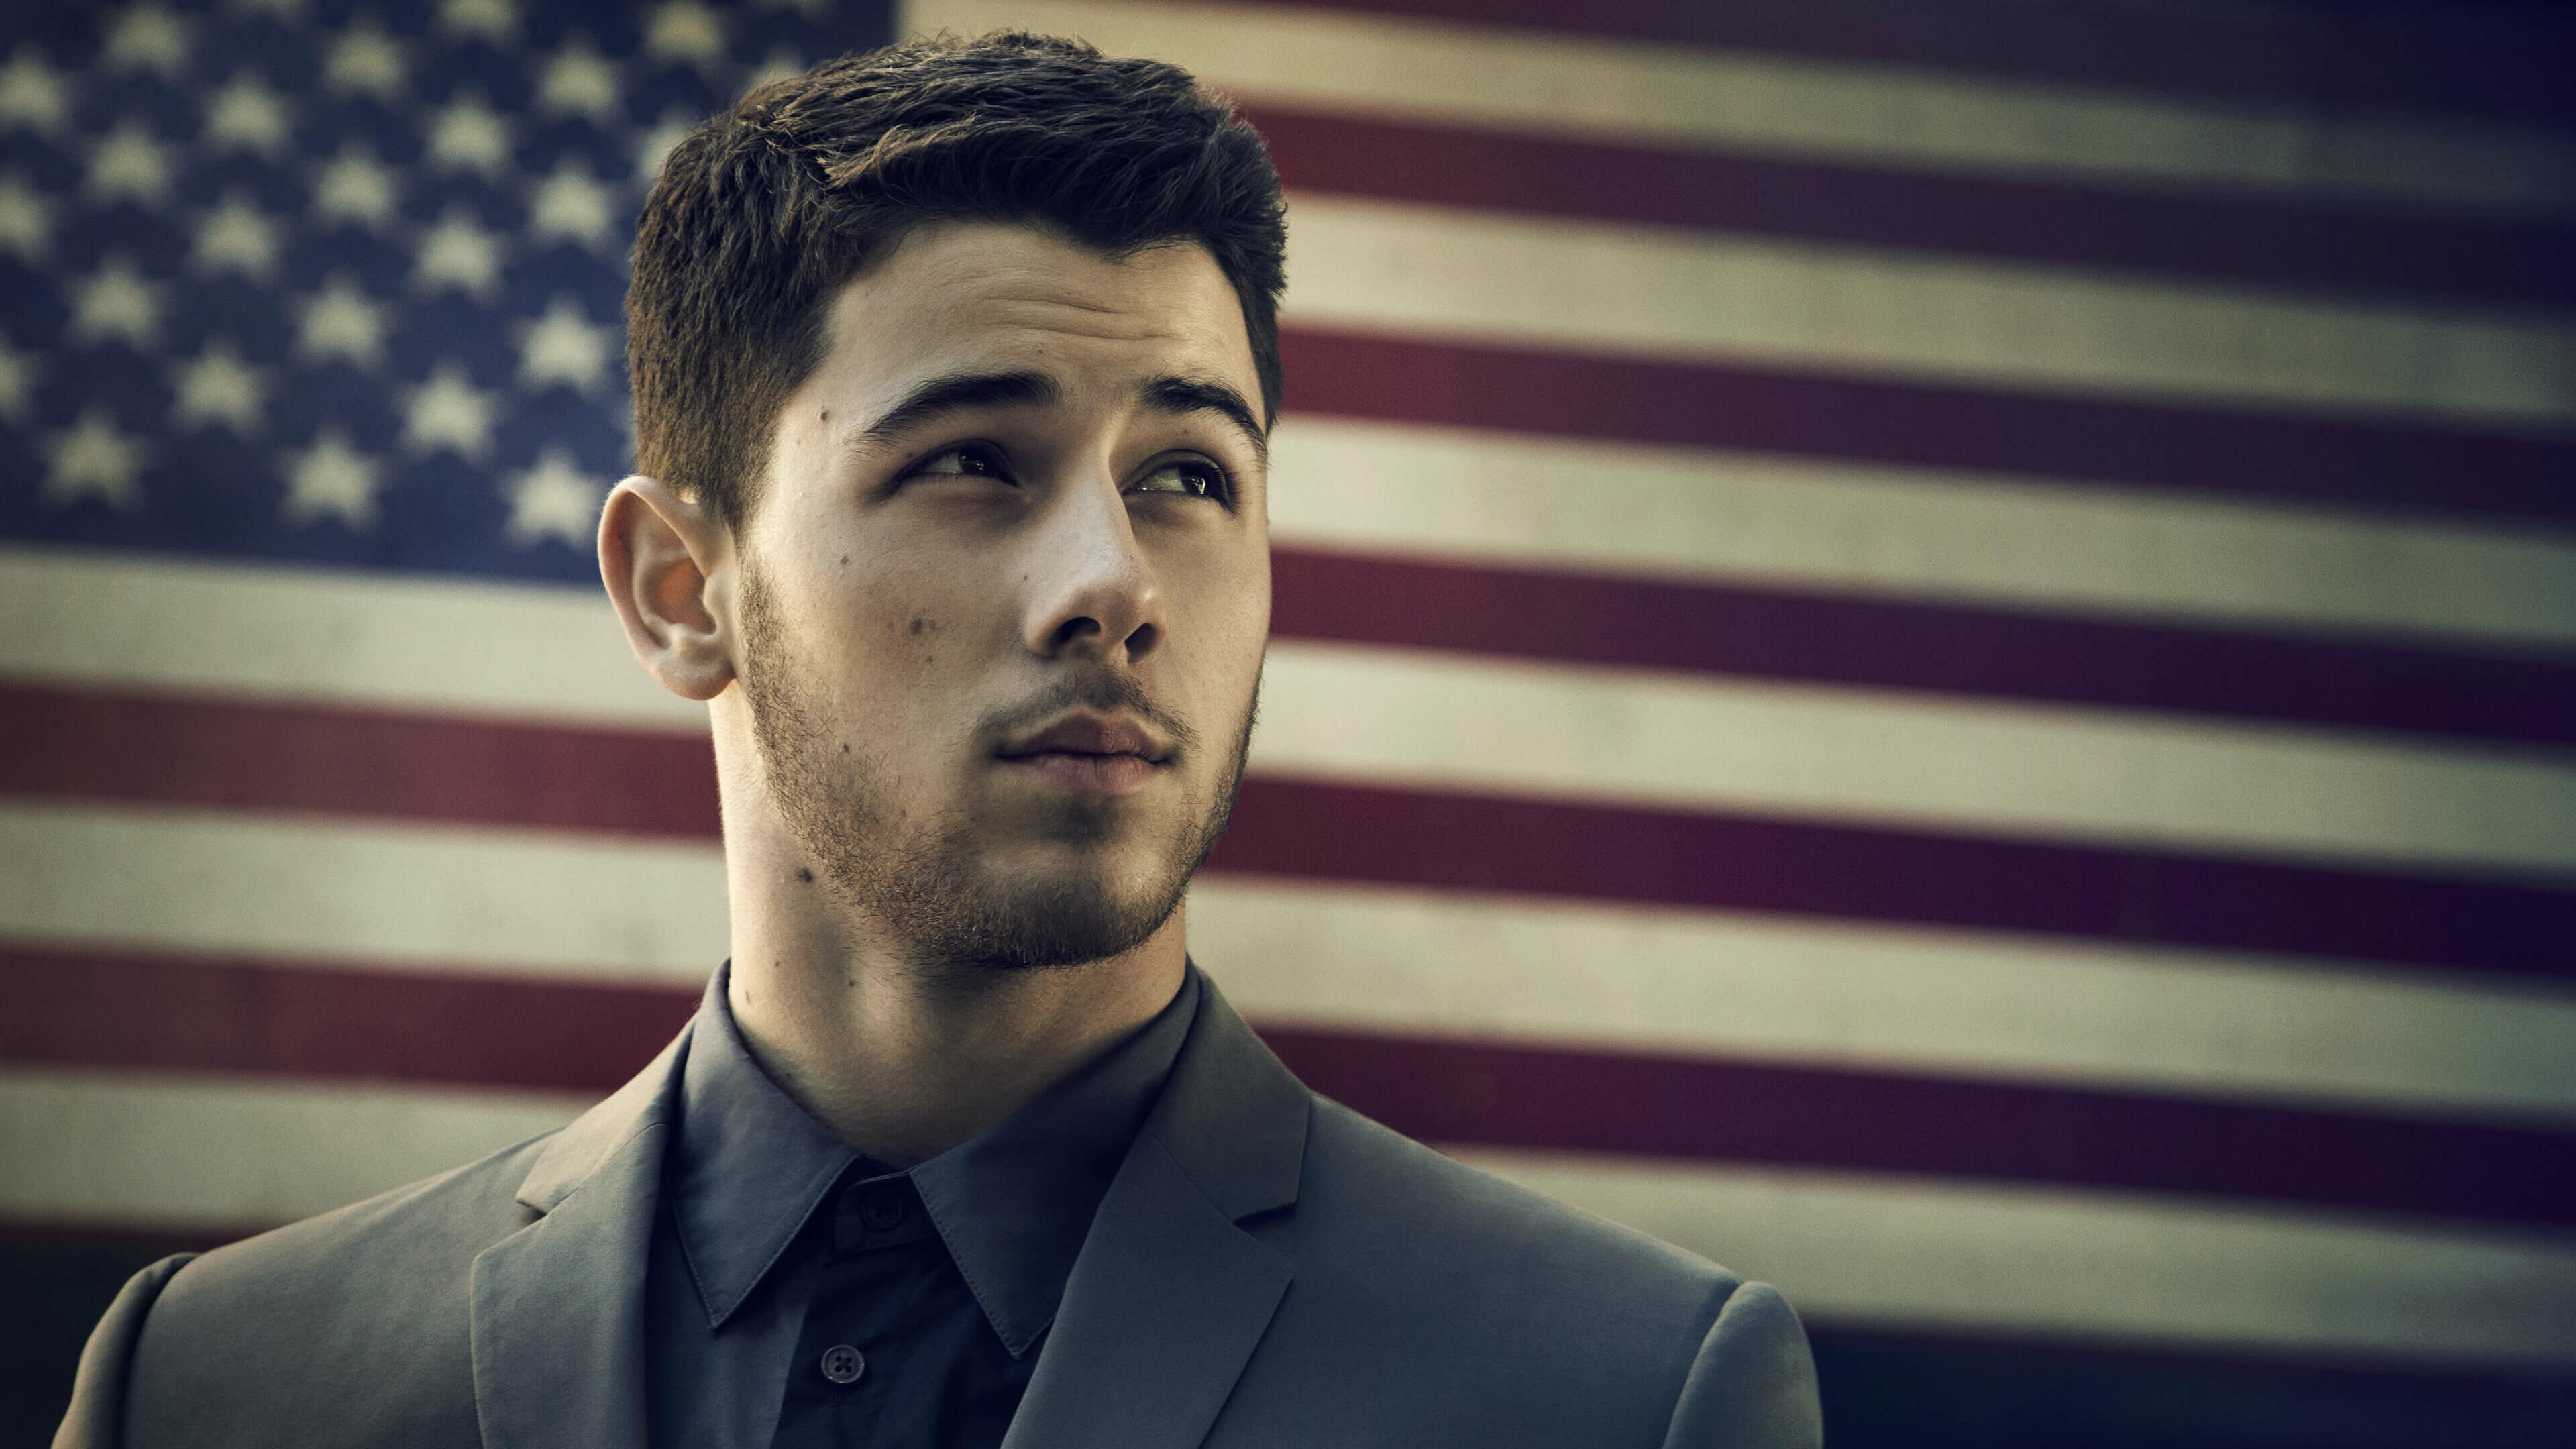 Jonas Brothers: Nick, An American pop rock band formed in 2005, Musician. 3840x2160 4K Wallpaper.